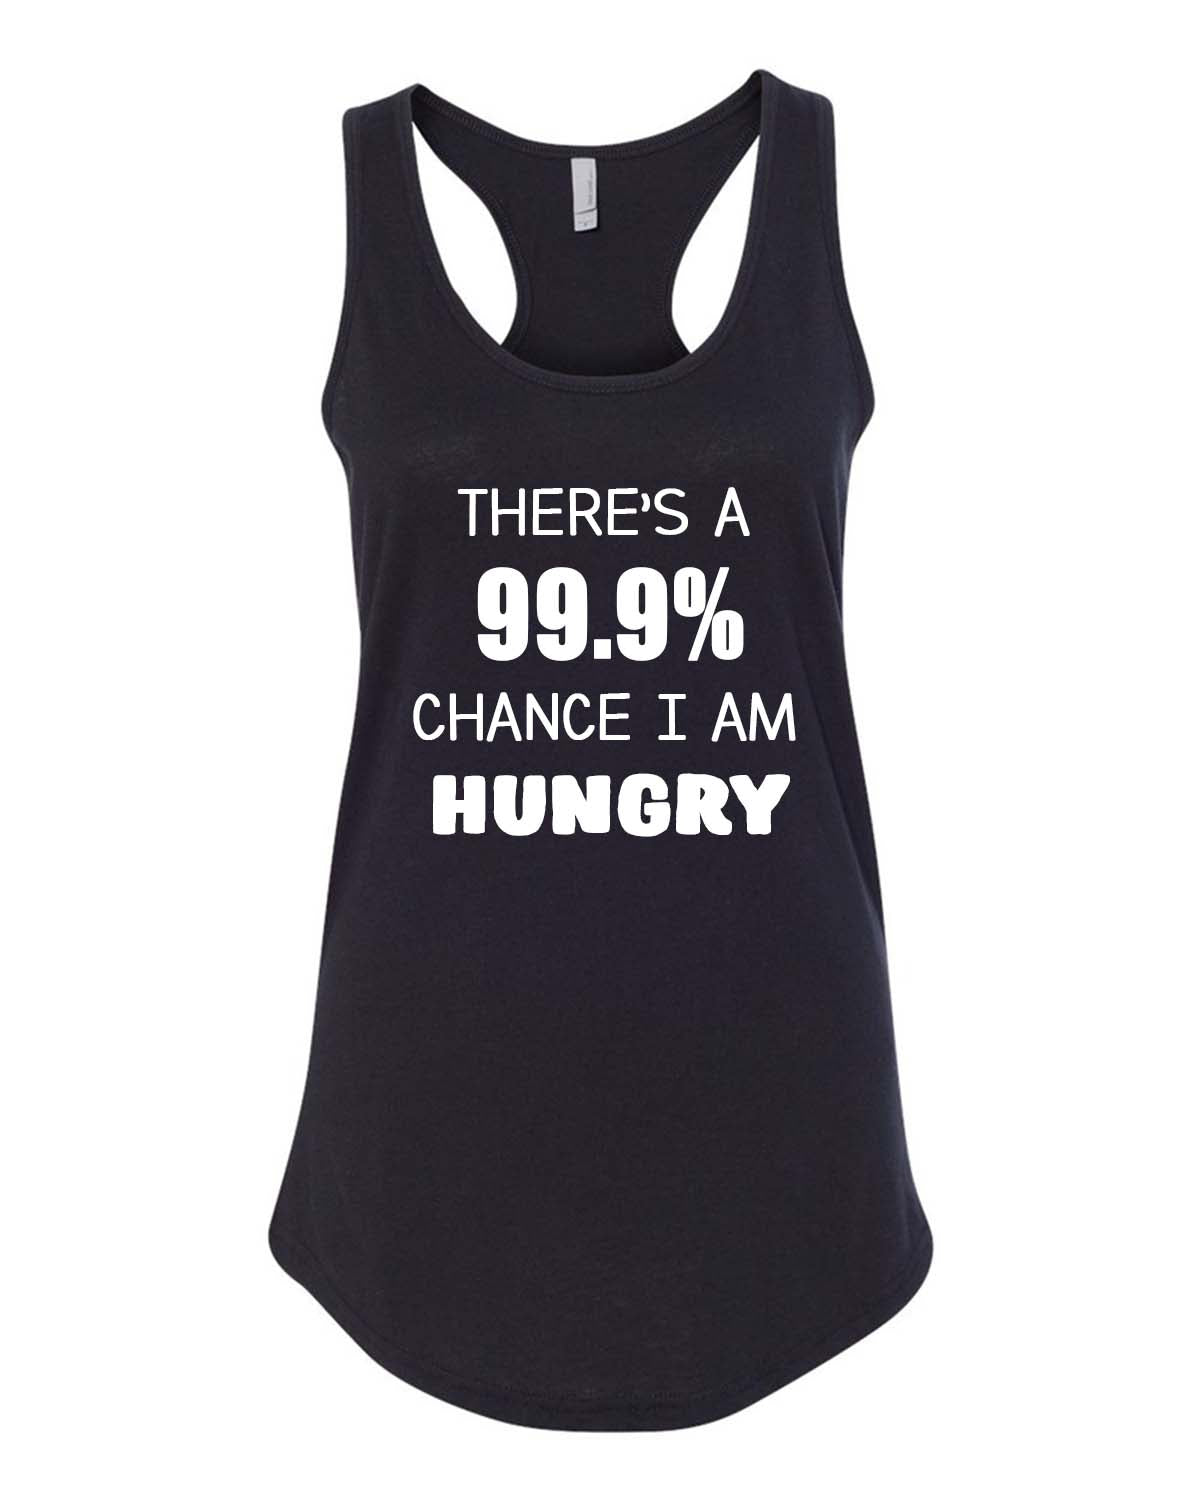 There's a 99.9% chance I am Hungry